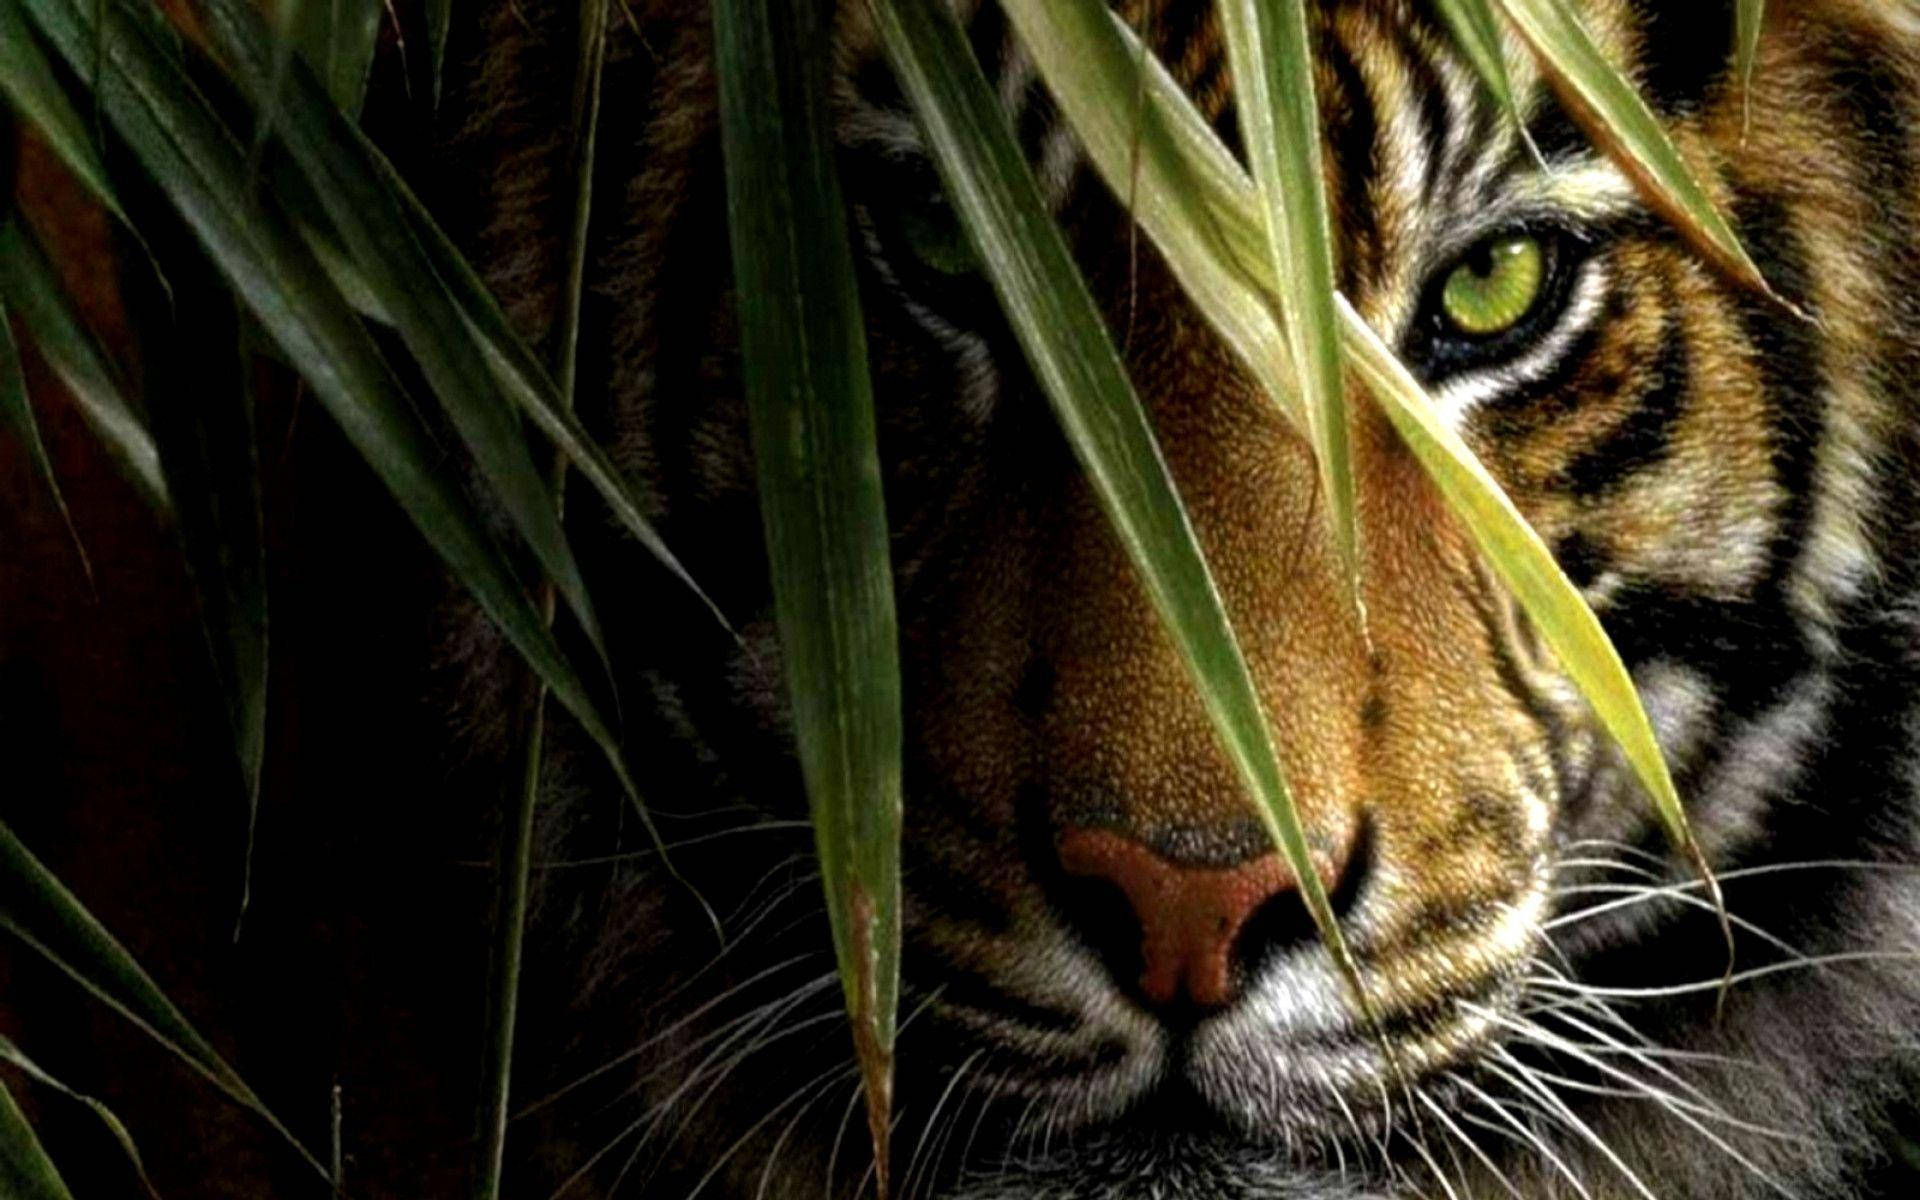 Download Tiger wallpapers for mobile phone free Tiger HD pictures